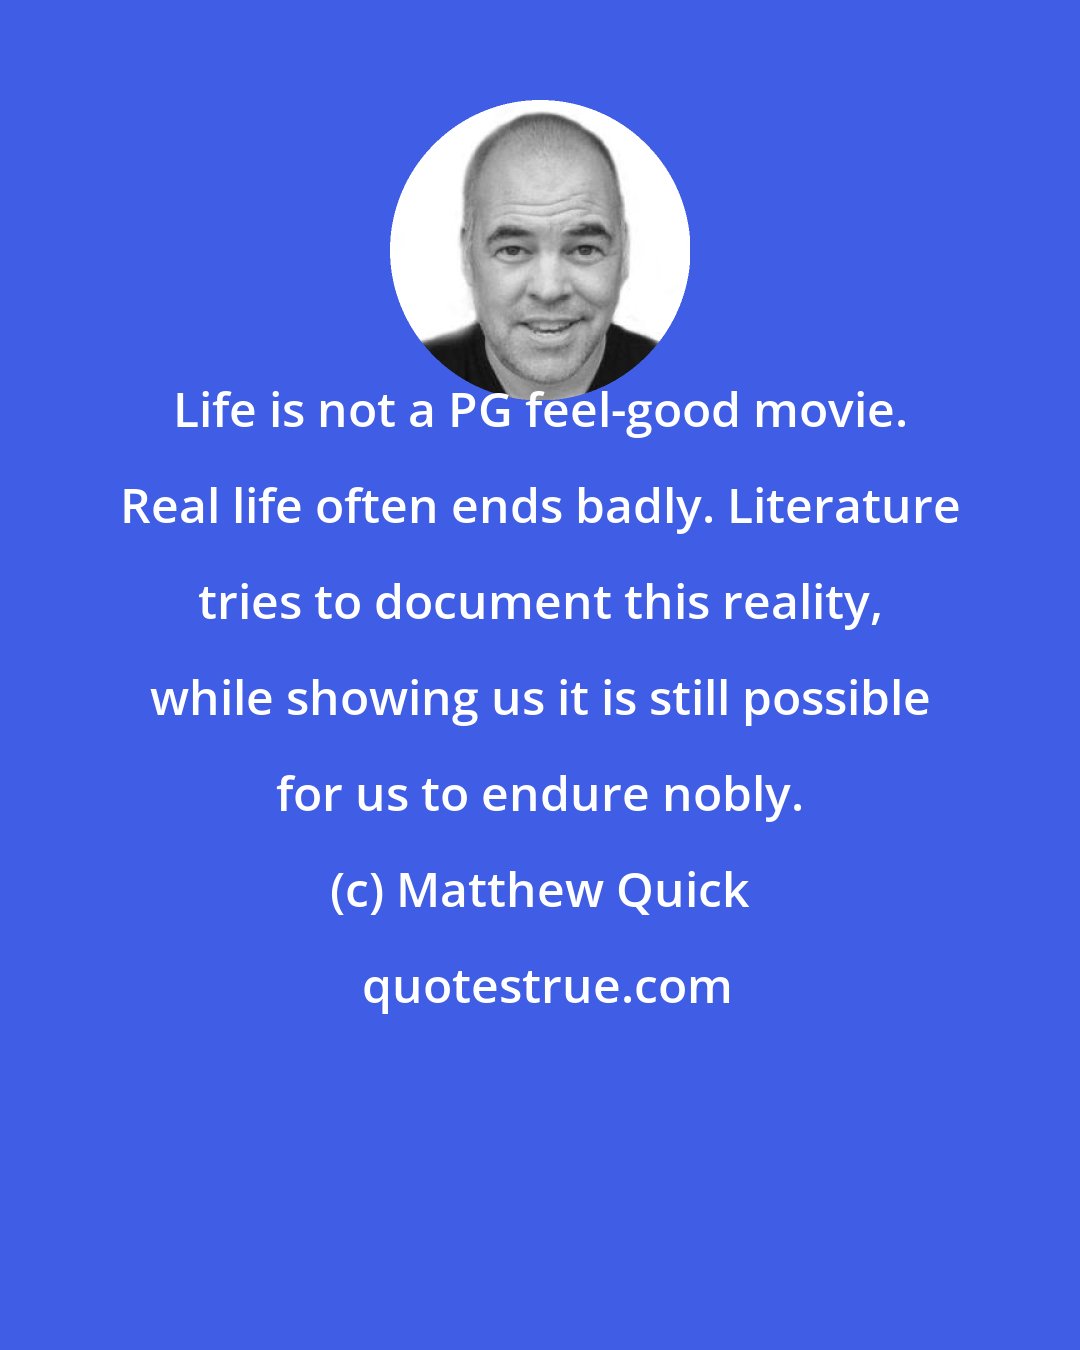 Matthew Quick: Life is not a PG feel-good movie. Real life often ends badly. Literature tries to document this reality, while showing us it is still possible for us to endure nobly.